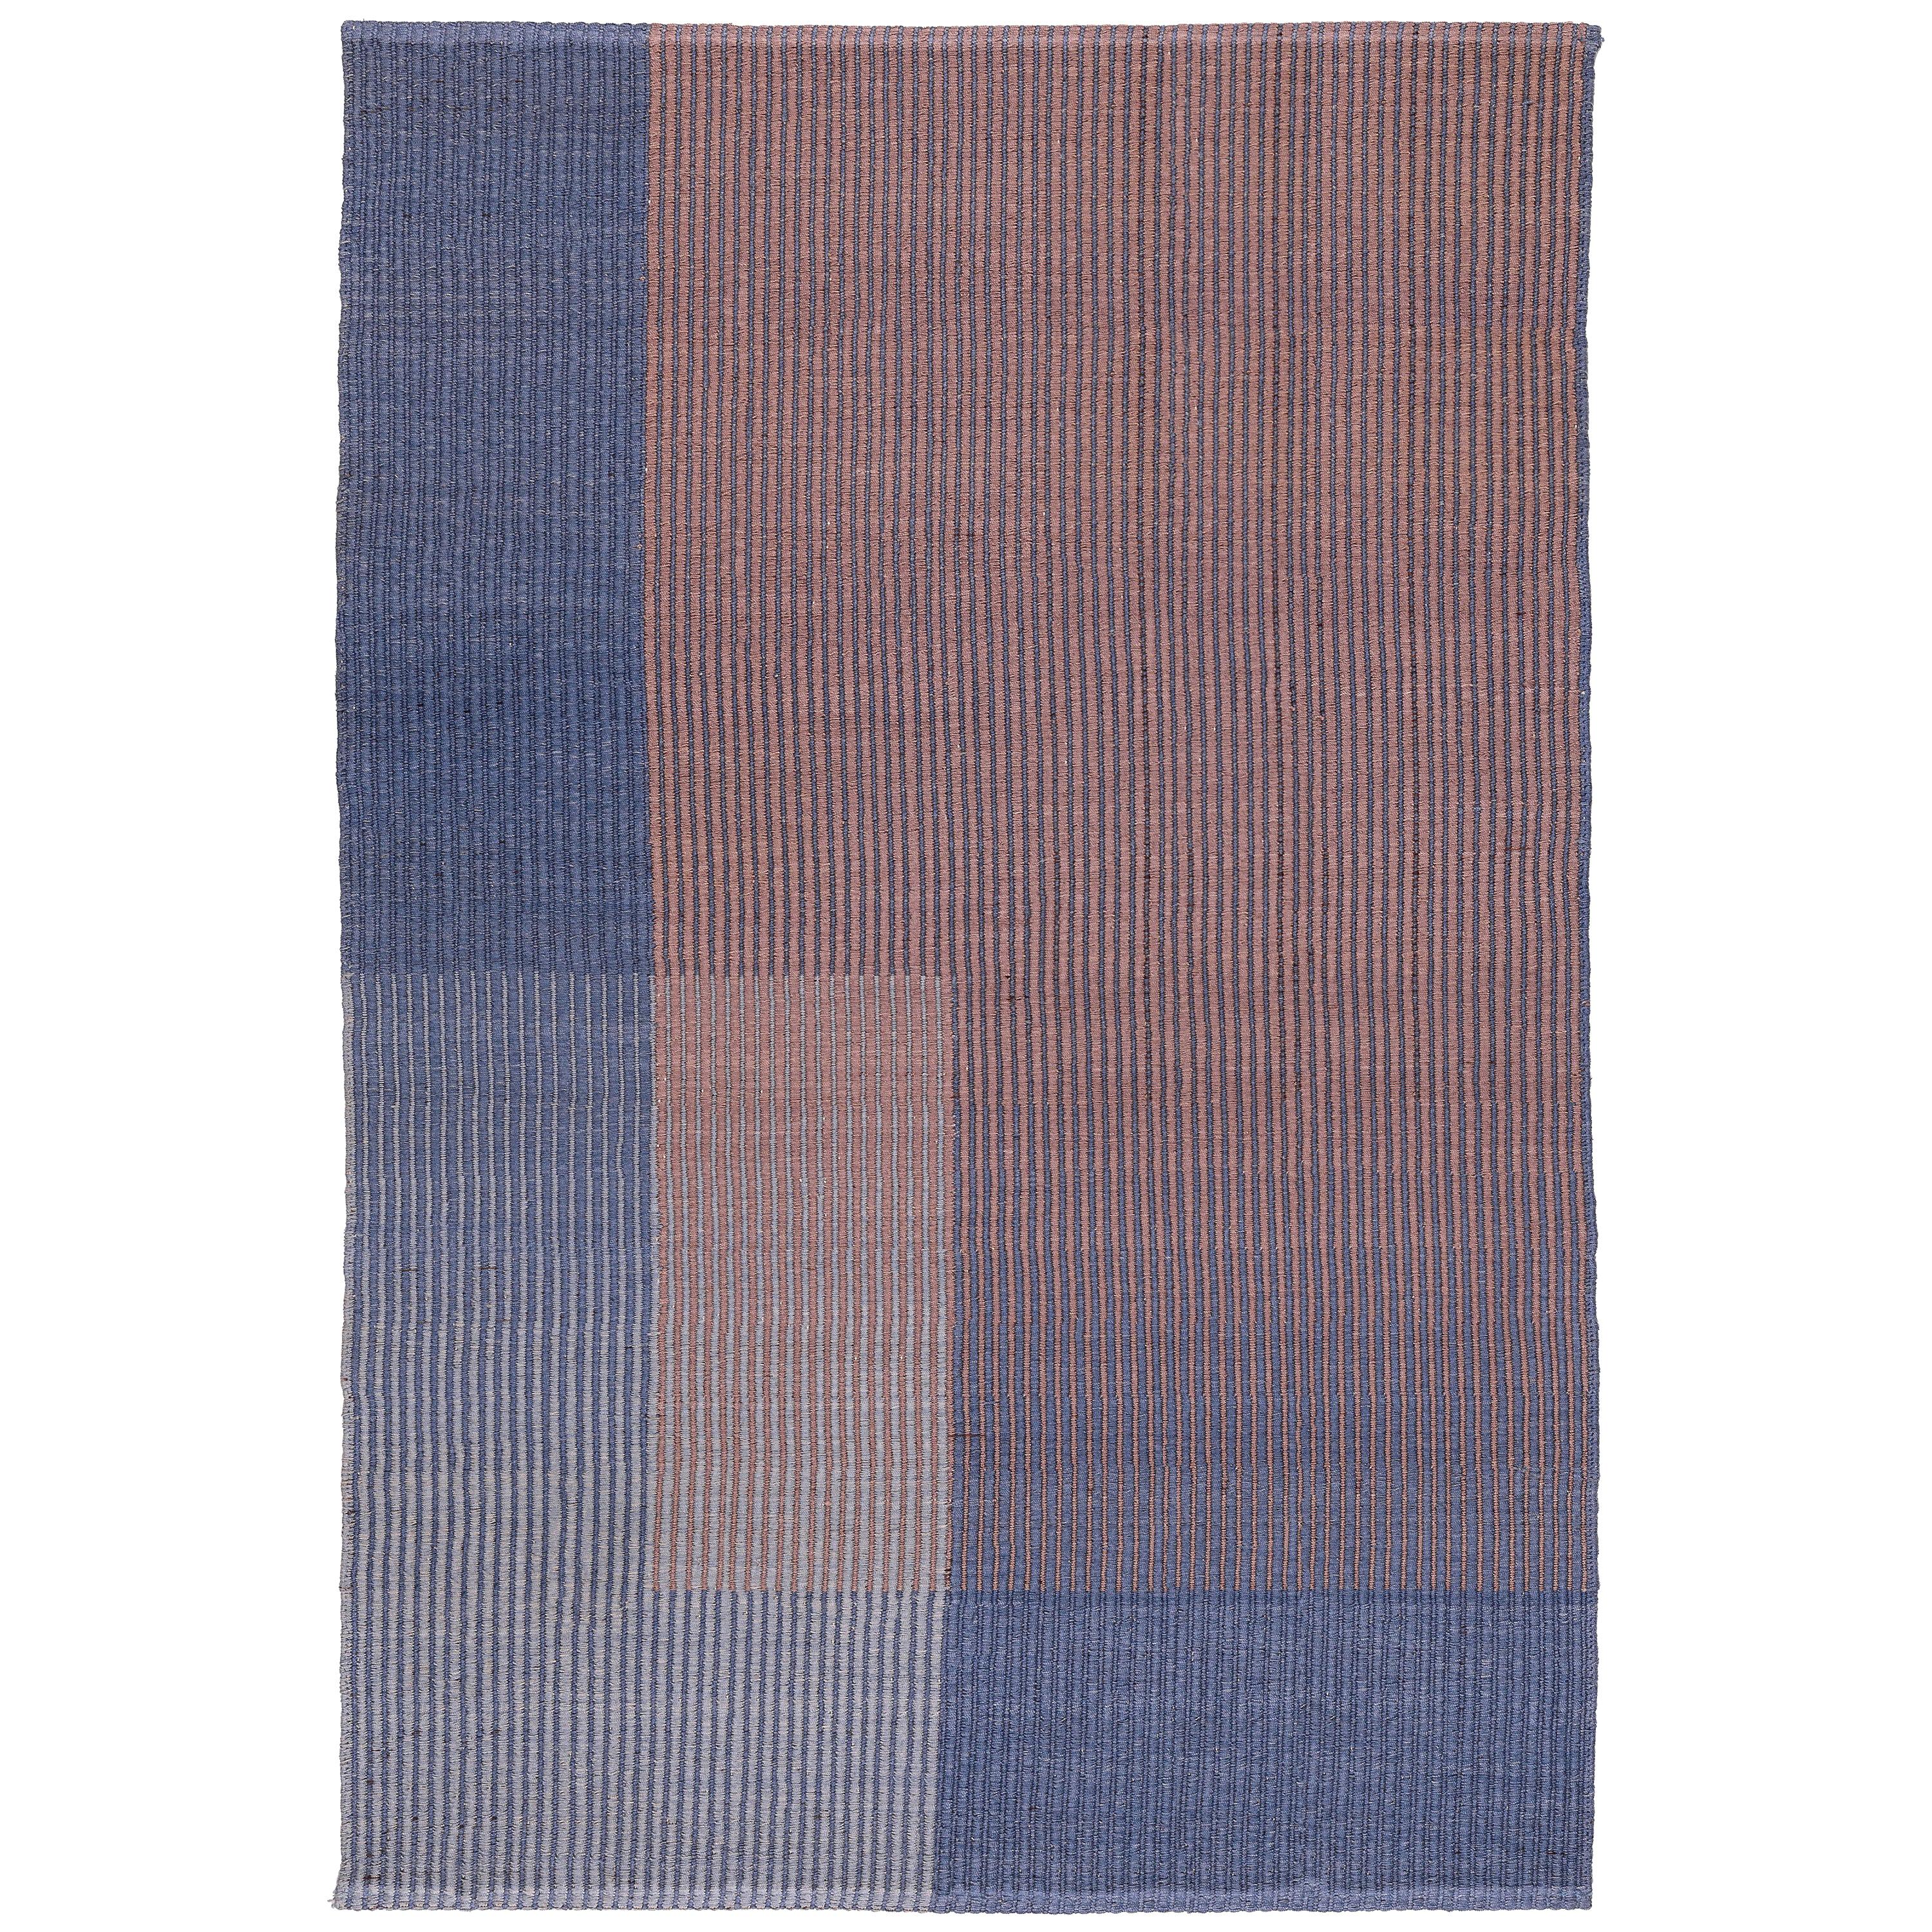 Haze Contemporary Kilim Area Rug Wool Handwoven Lake in Blue Small